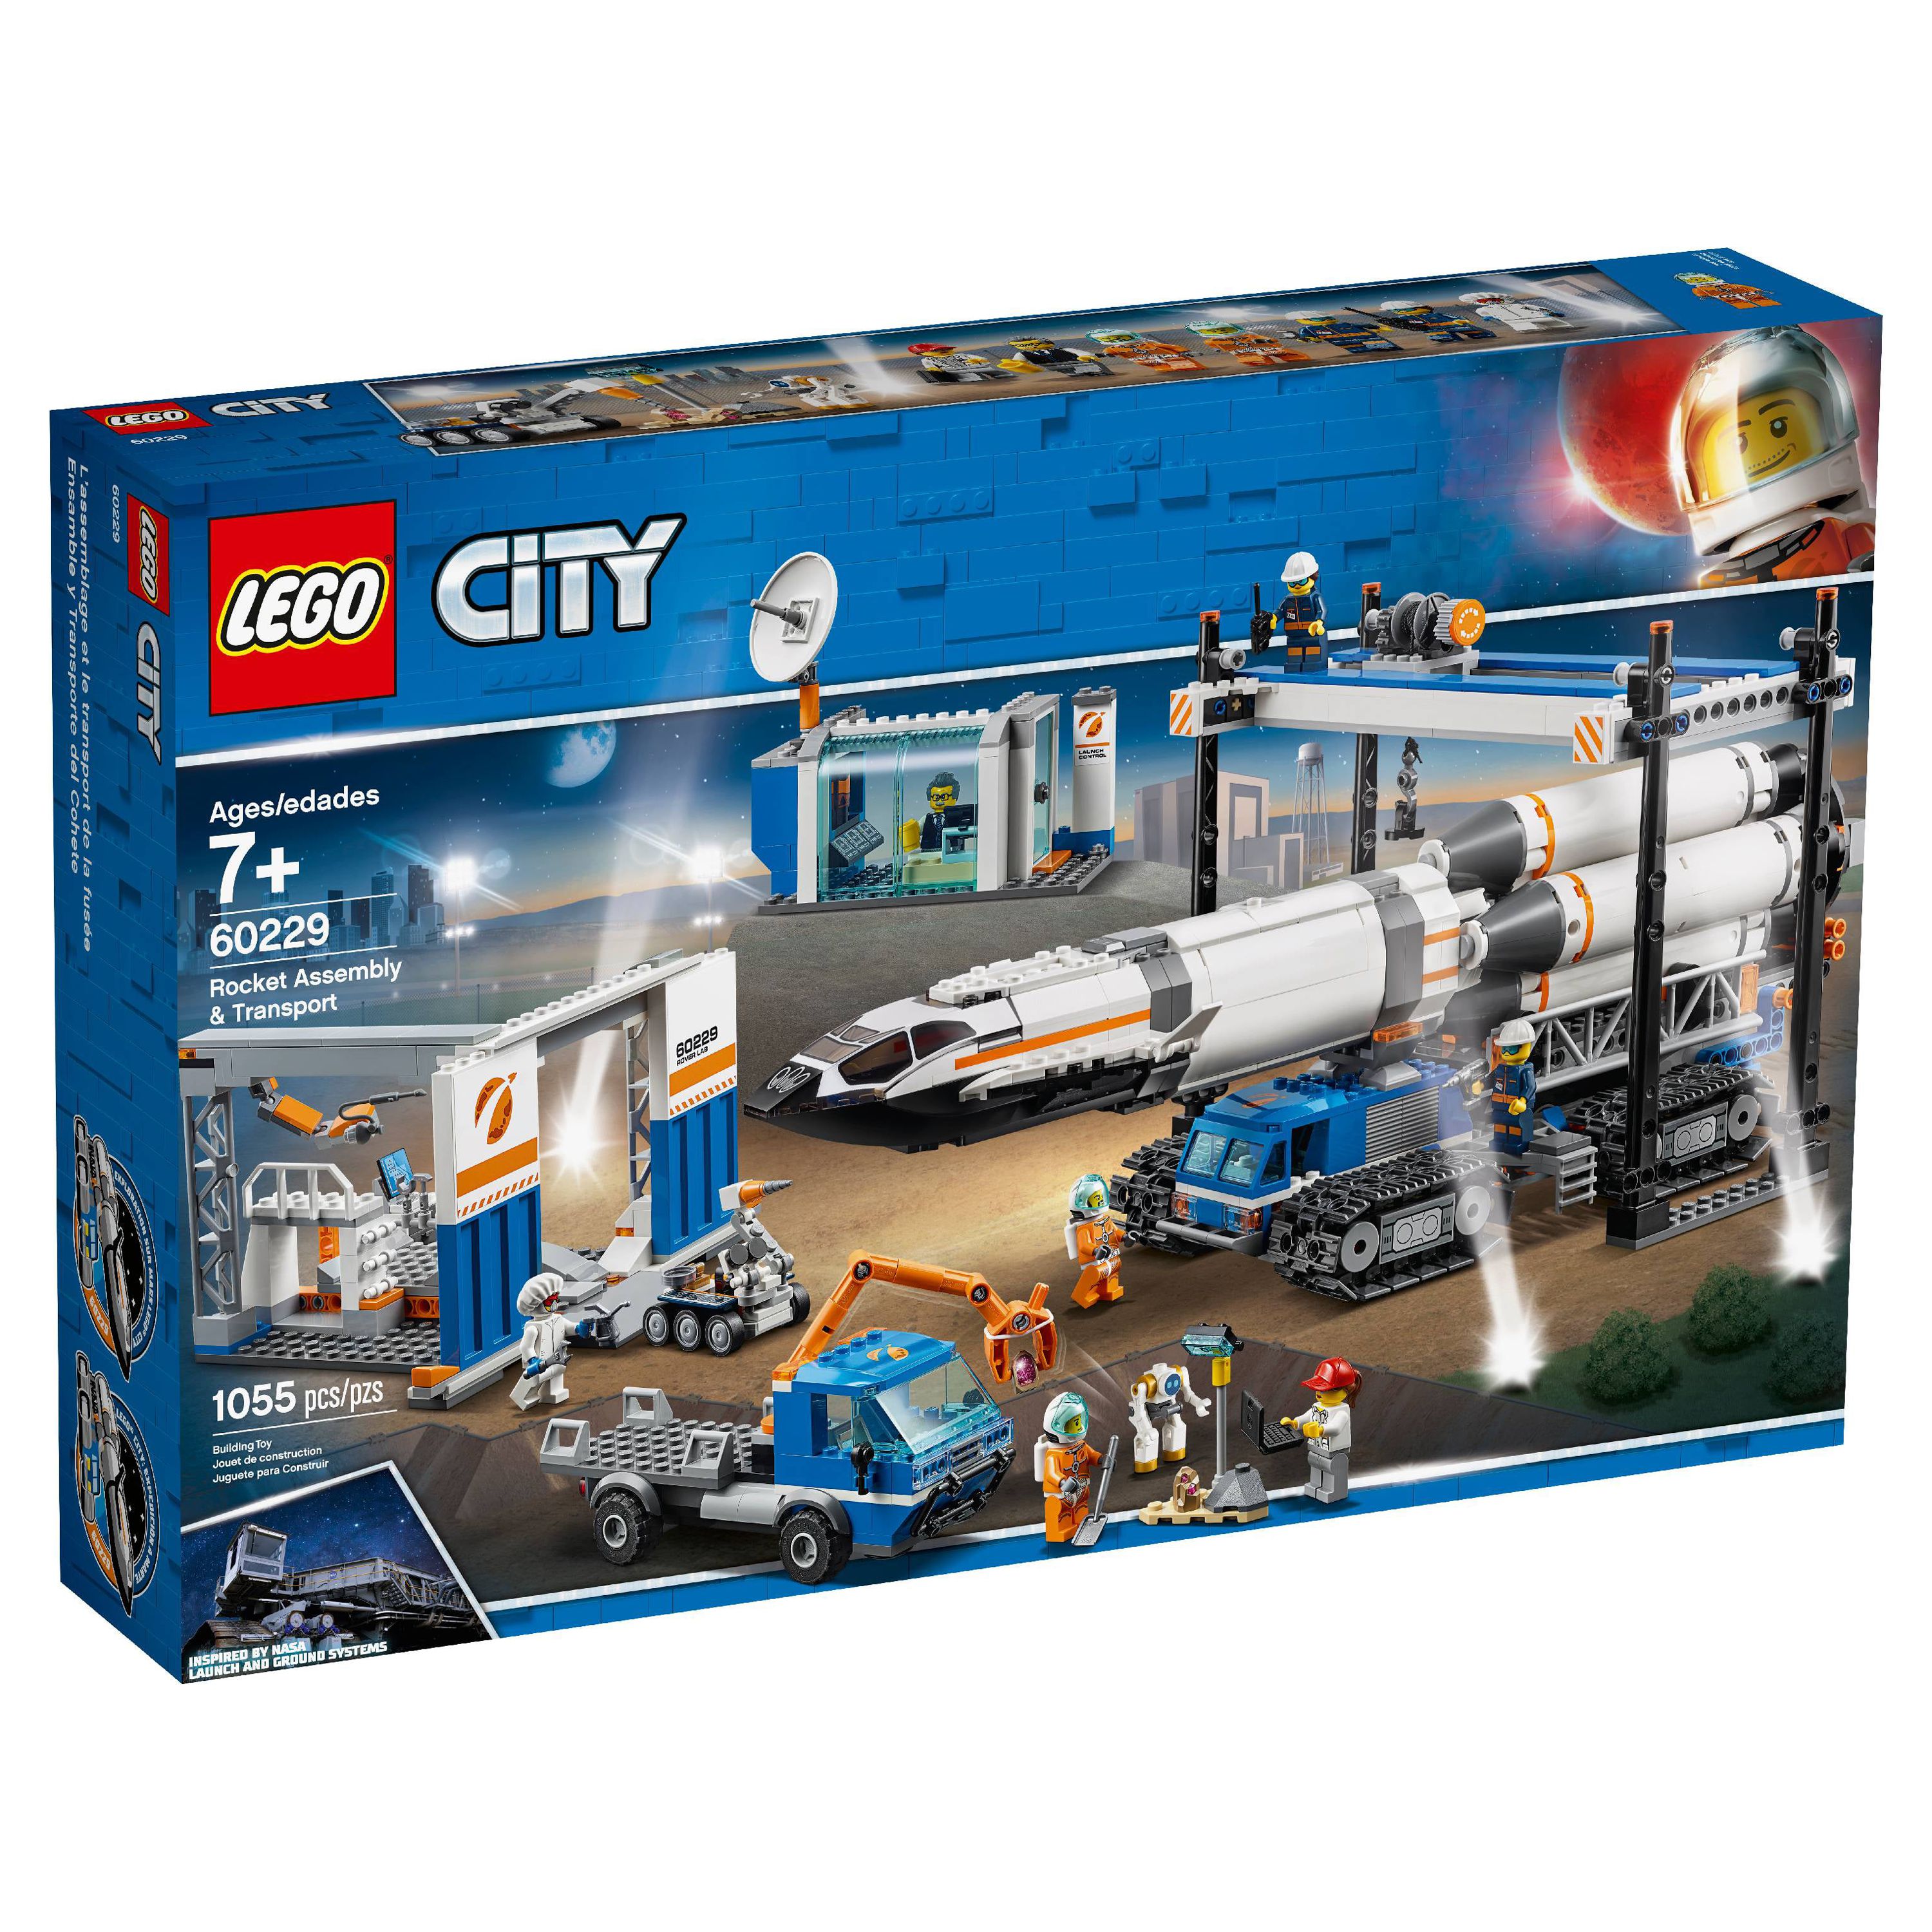 LEGO City Space Rocket Assembly & Transport 60229 Toy Set (1055 Pieces) - image 5 of 8